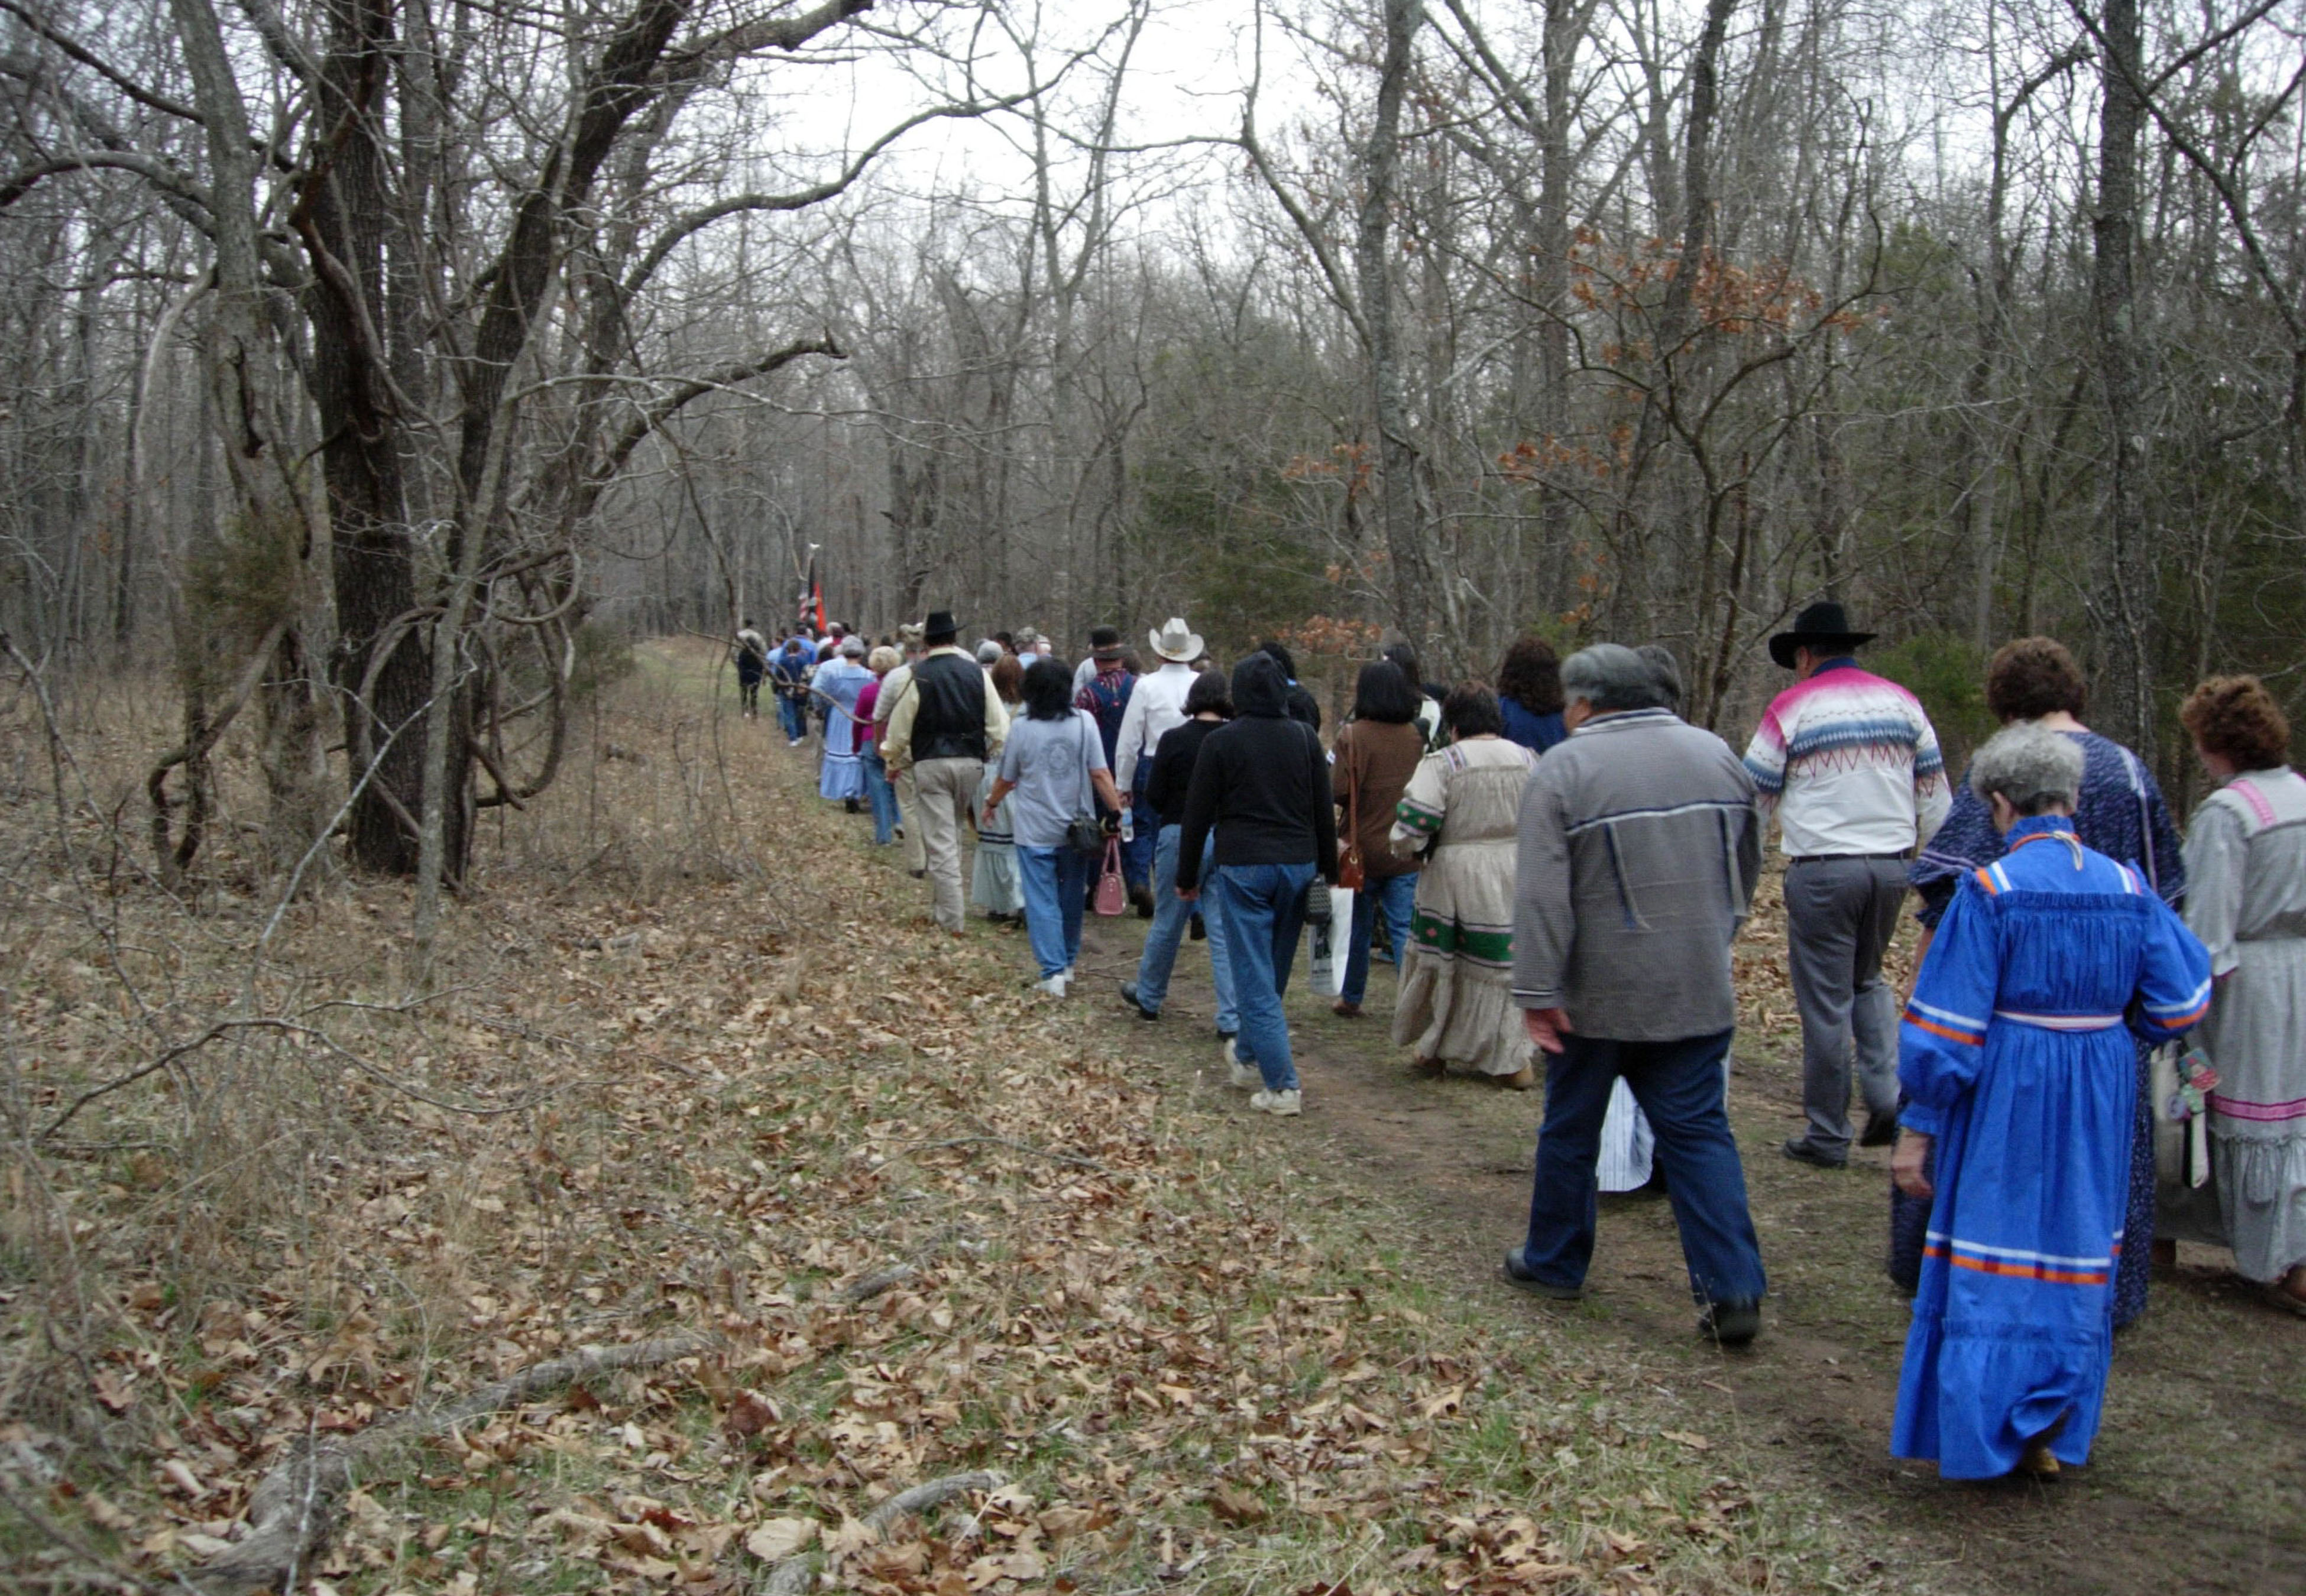 A long line of people walking down a trail through a forest.